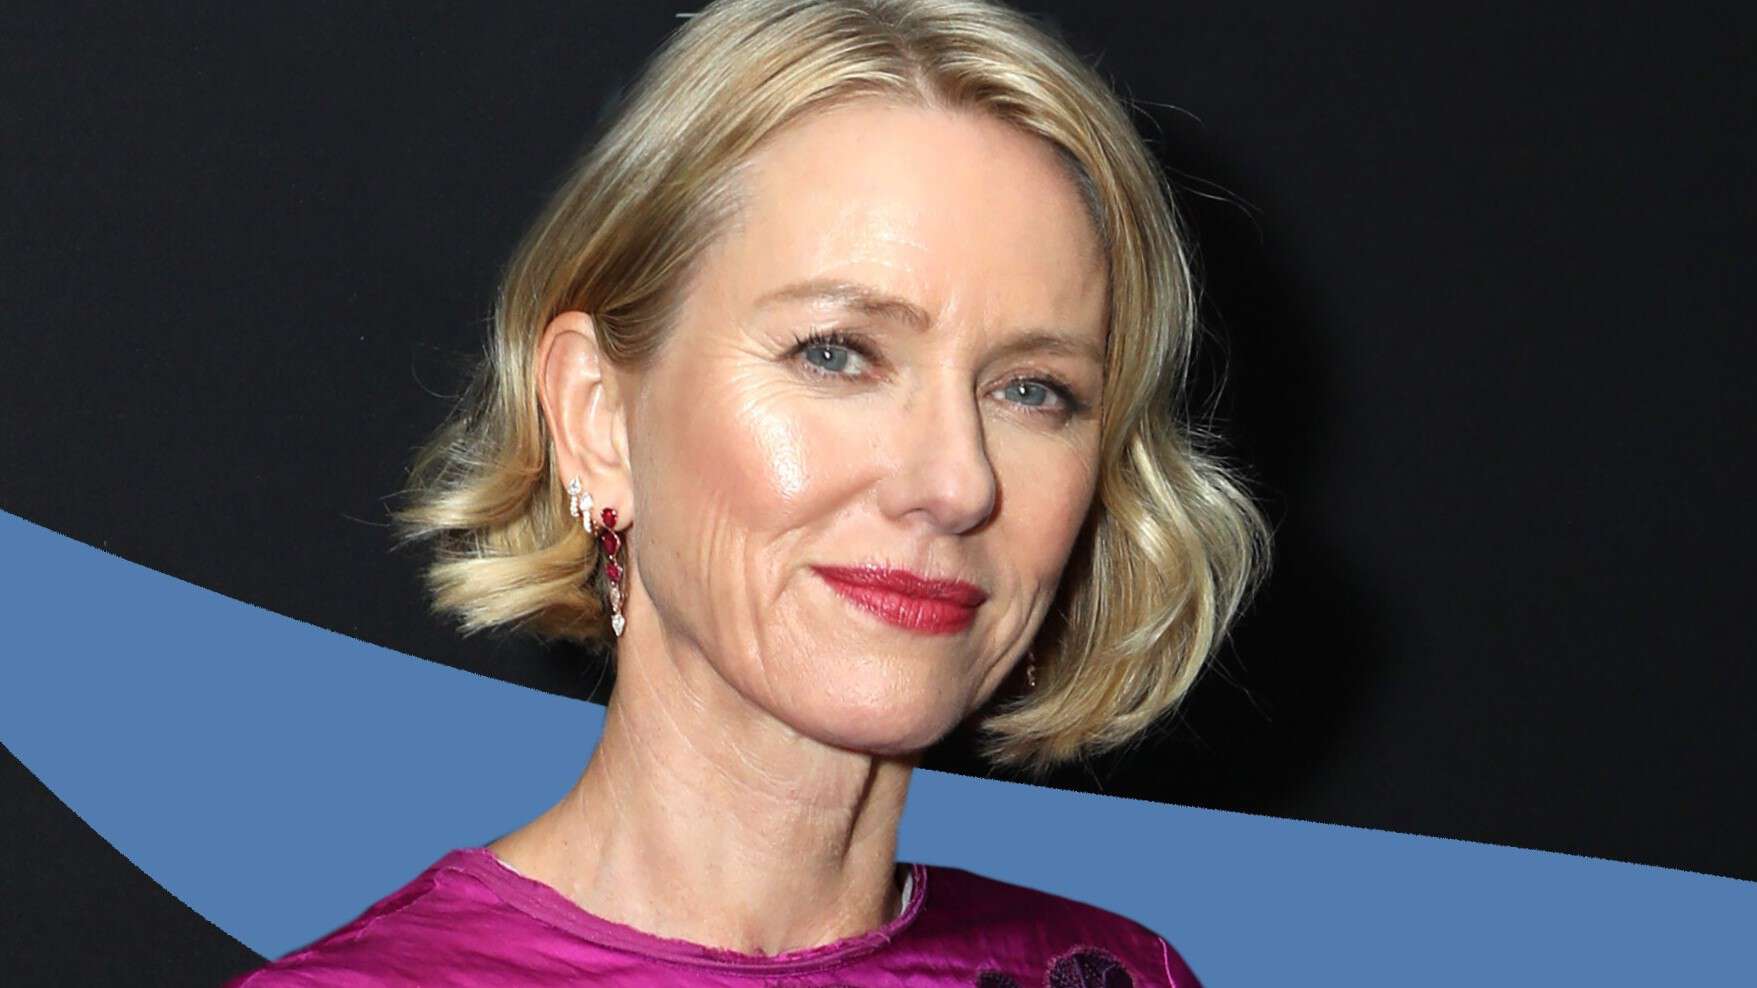 Naomi Watts has amassed a substantial net worth of approximately $35 million